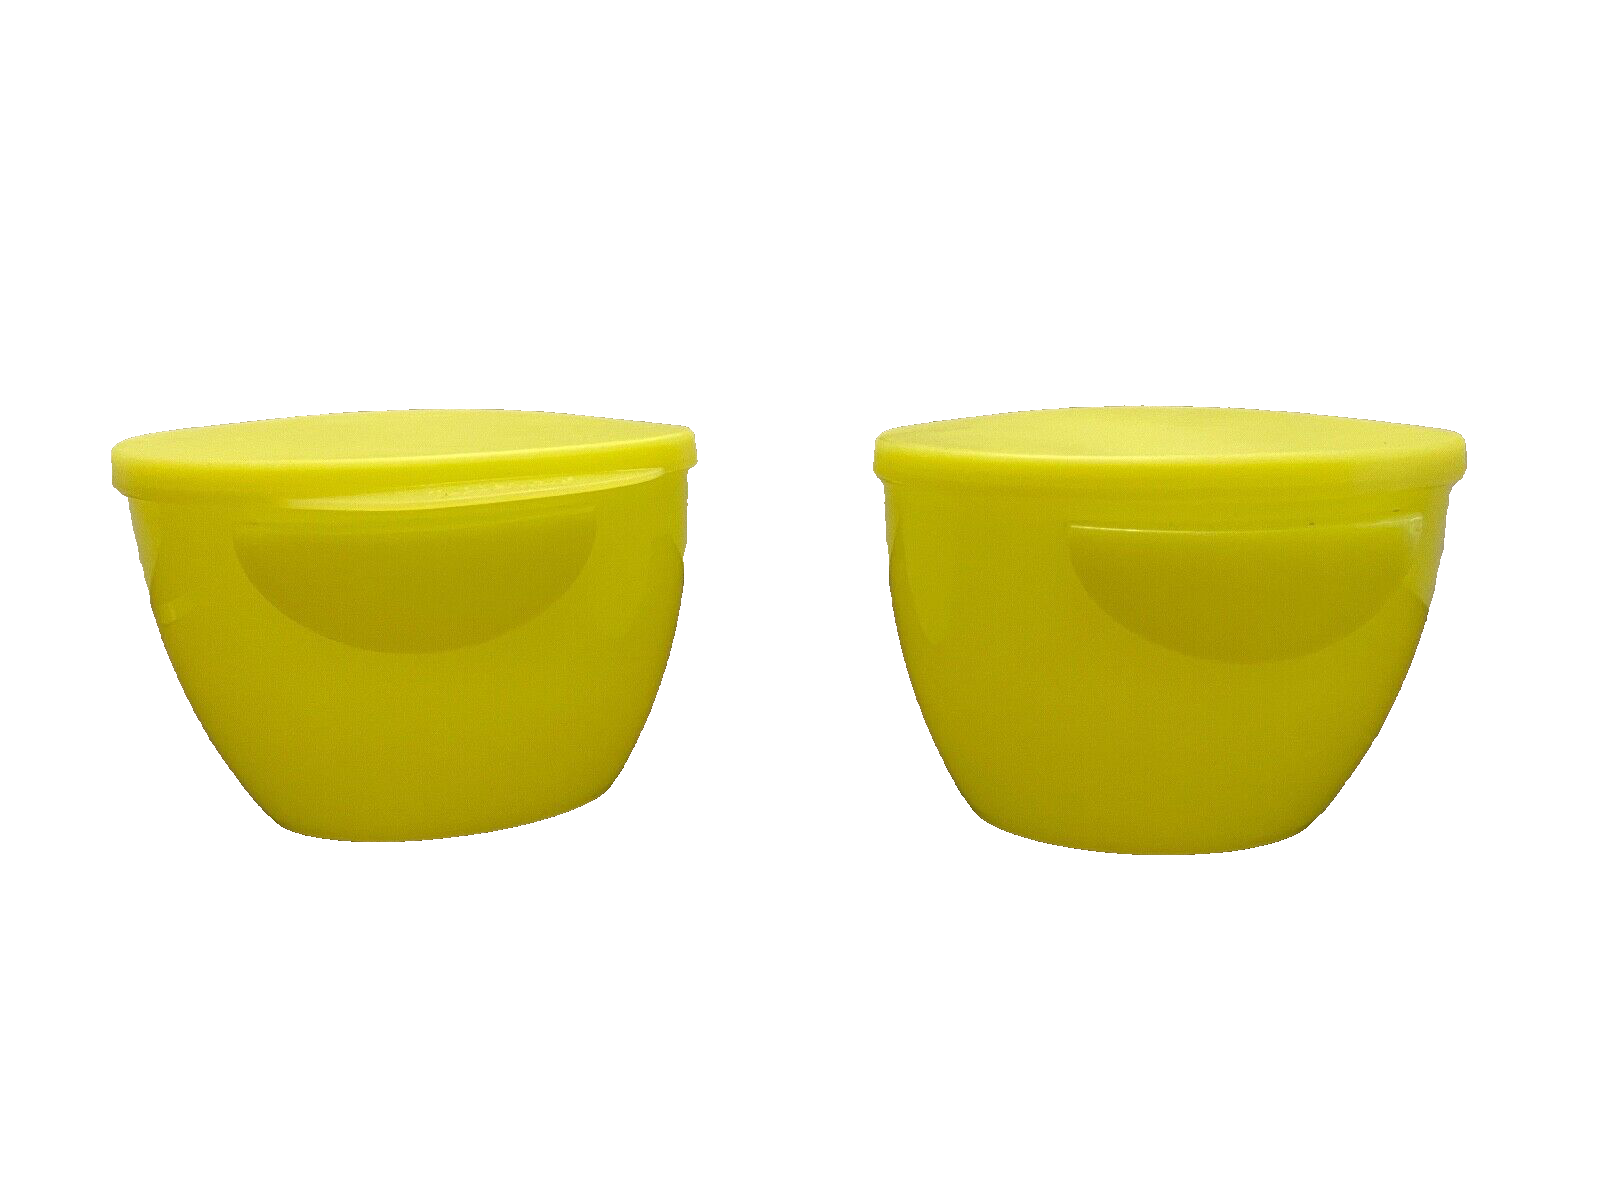 Primary image for Bowls Tupperware 2 Yellow 4626A-2 Hanging Dip Open House Collection 470ml